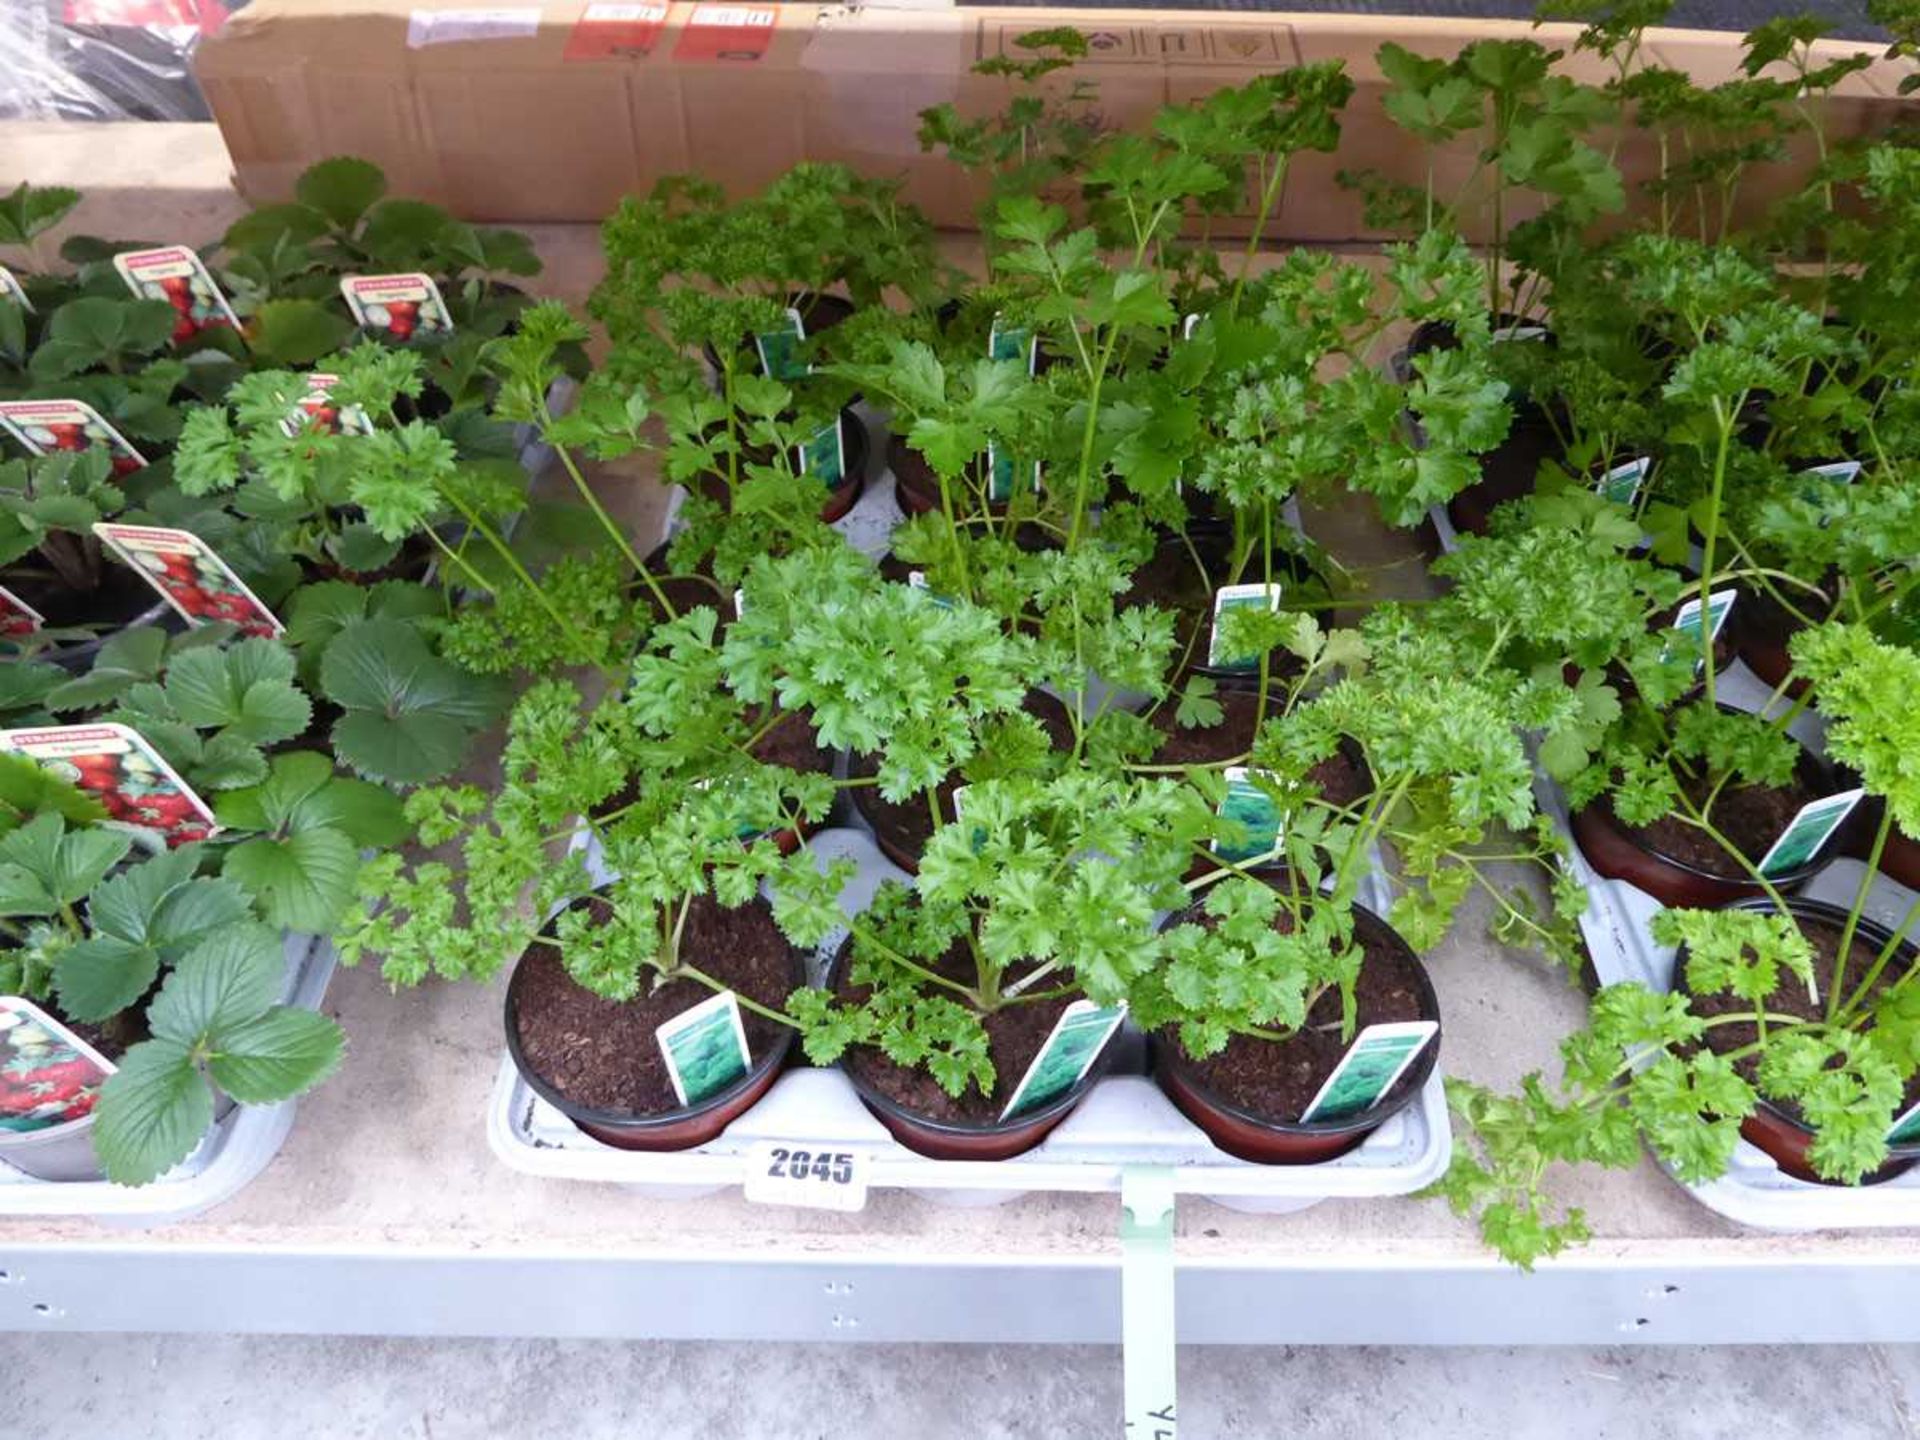 Tray containing 15 pots of curled parsley